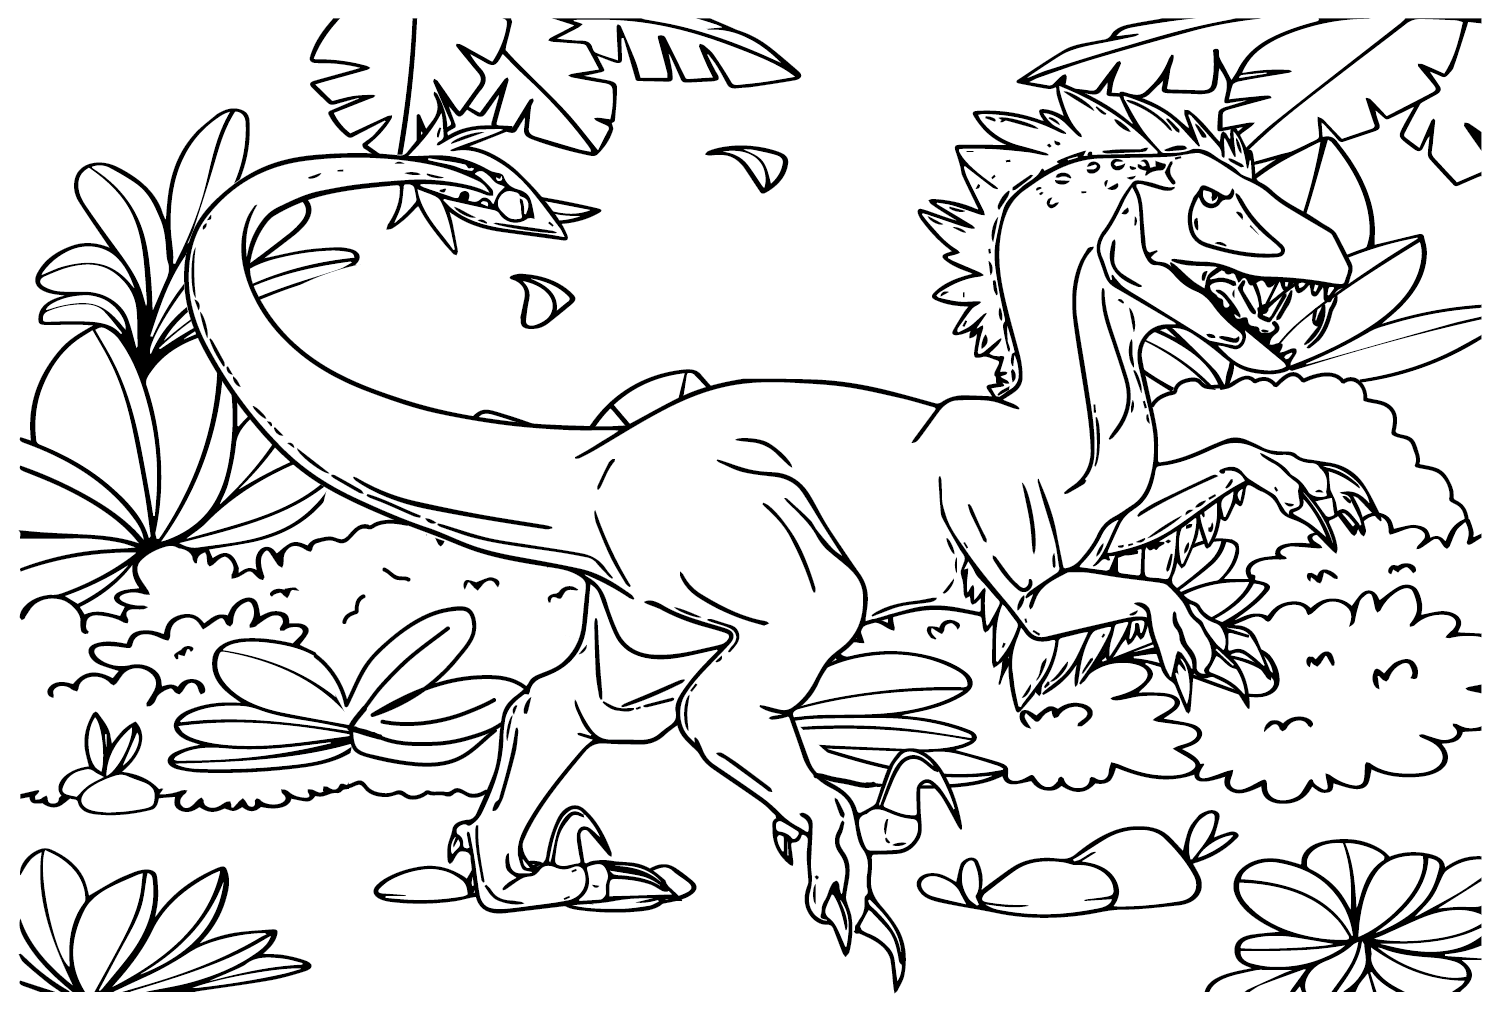 Utahraptor to Color - Free Printable Coloring Pages